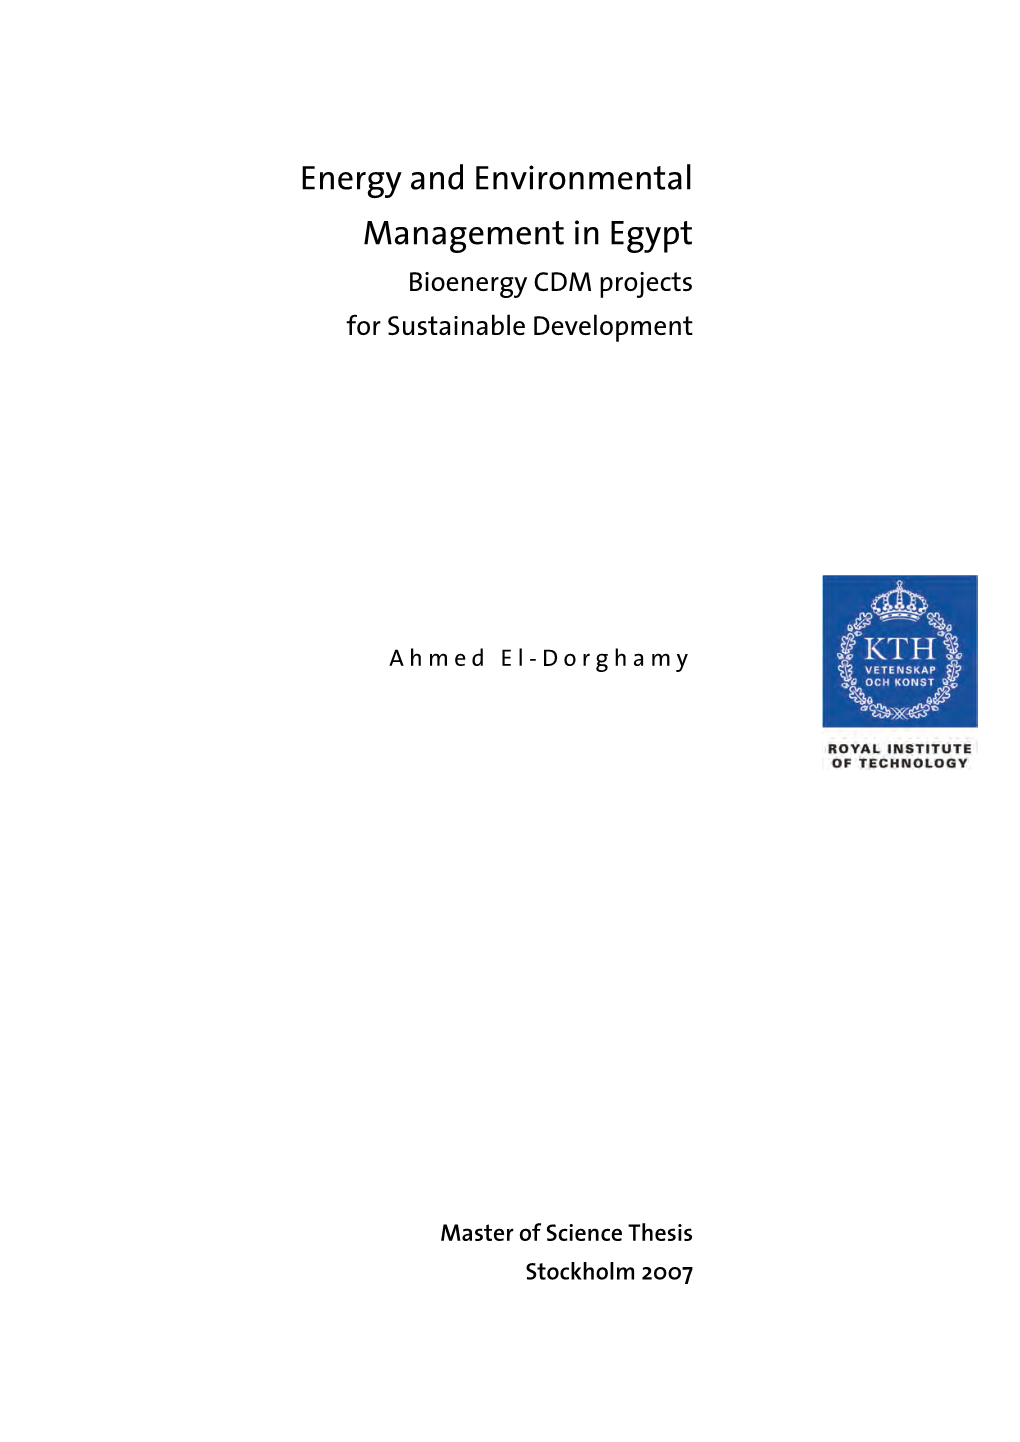 Energy and Environmental Management in Egypt Bioenergy Cdm Projects for Sustainable Development